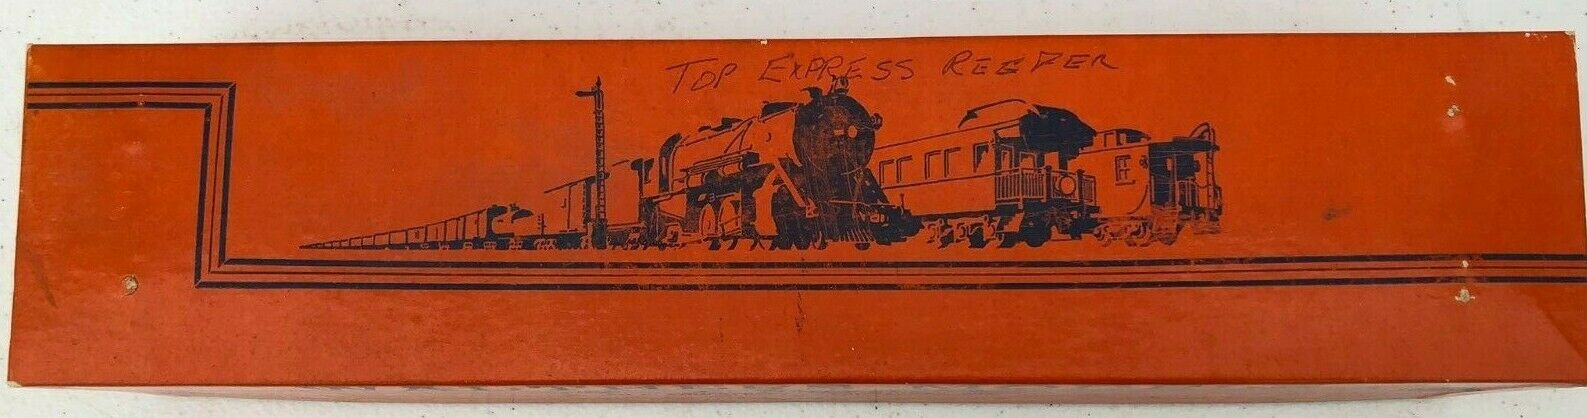 Vintage Walthers Models Train Box - Box Only - Milwaukee - Express Reefer 3866